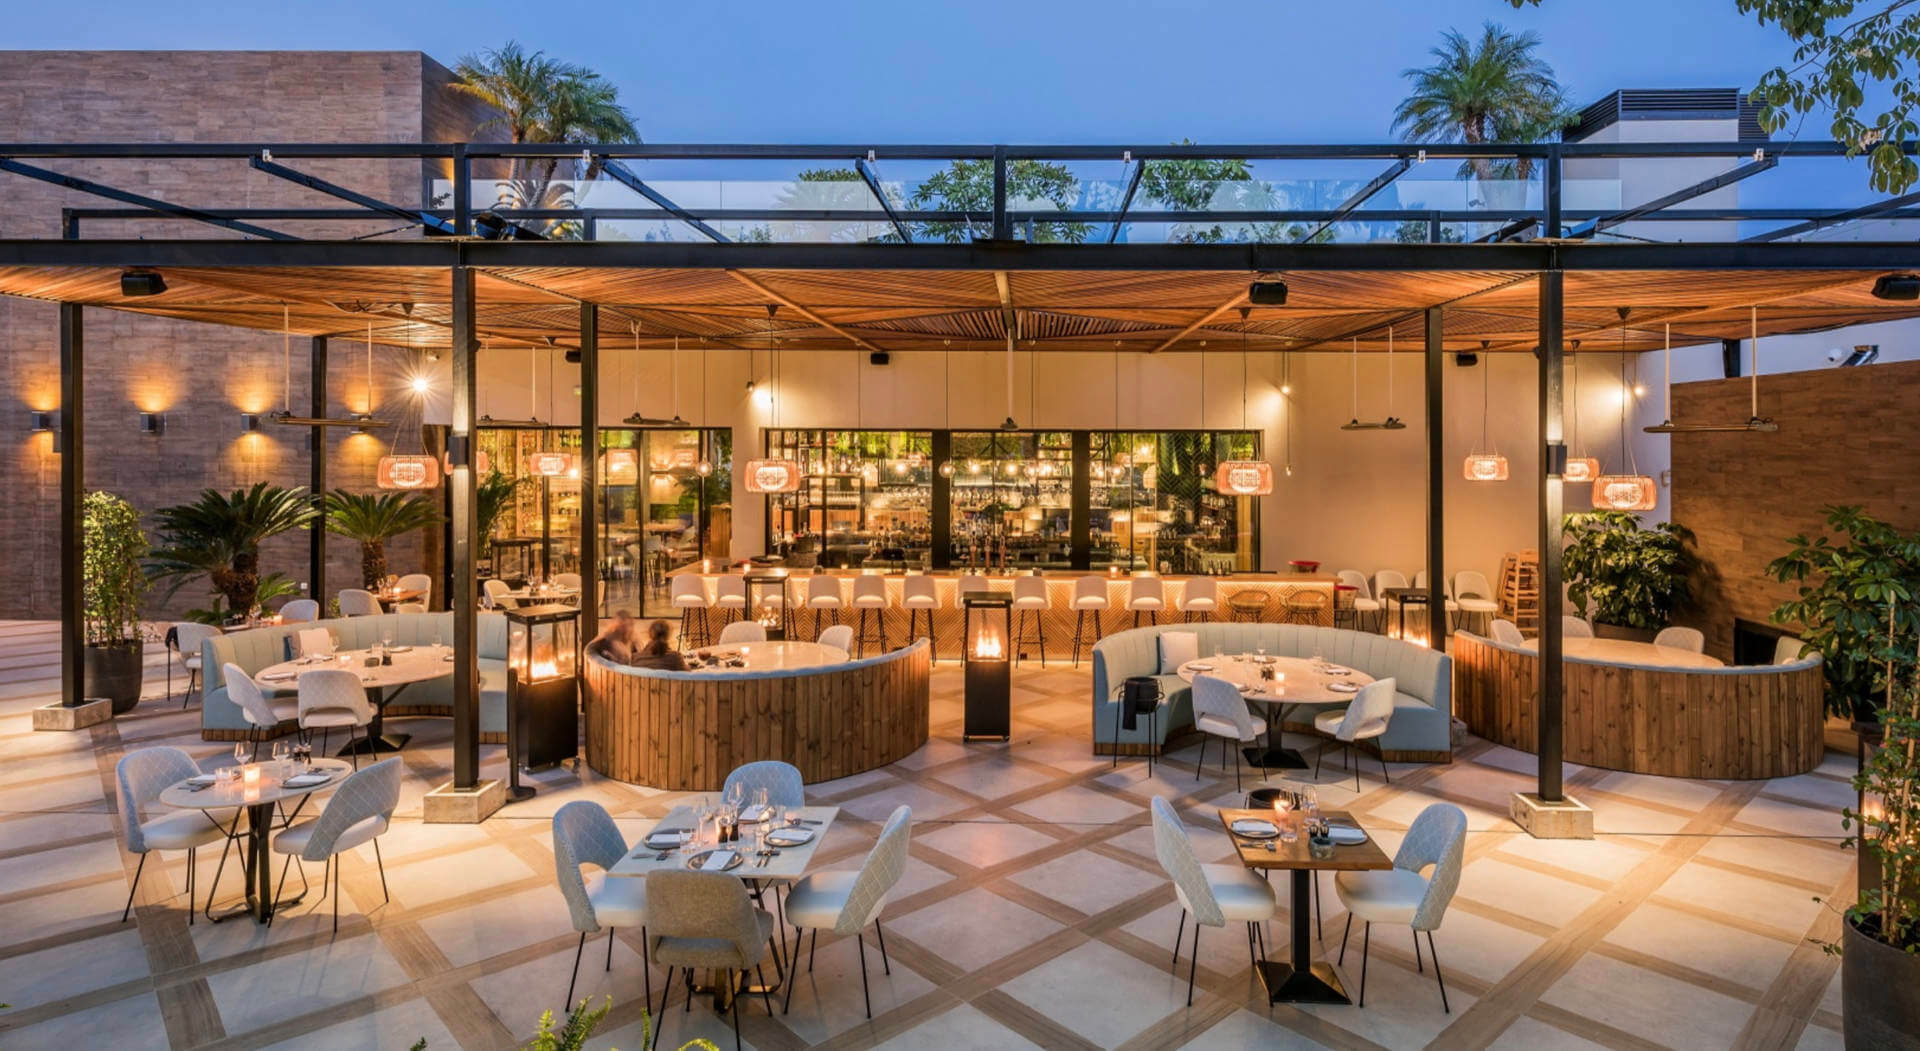 BREATHE RESTAURANT MARBELLA HOSTS THE LAUNCH EVENT OF THE GUILD OF SPANISH PROPERTY PROFESSIONALS